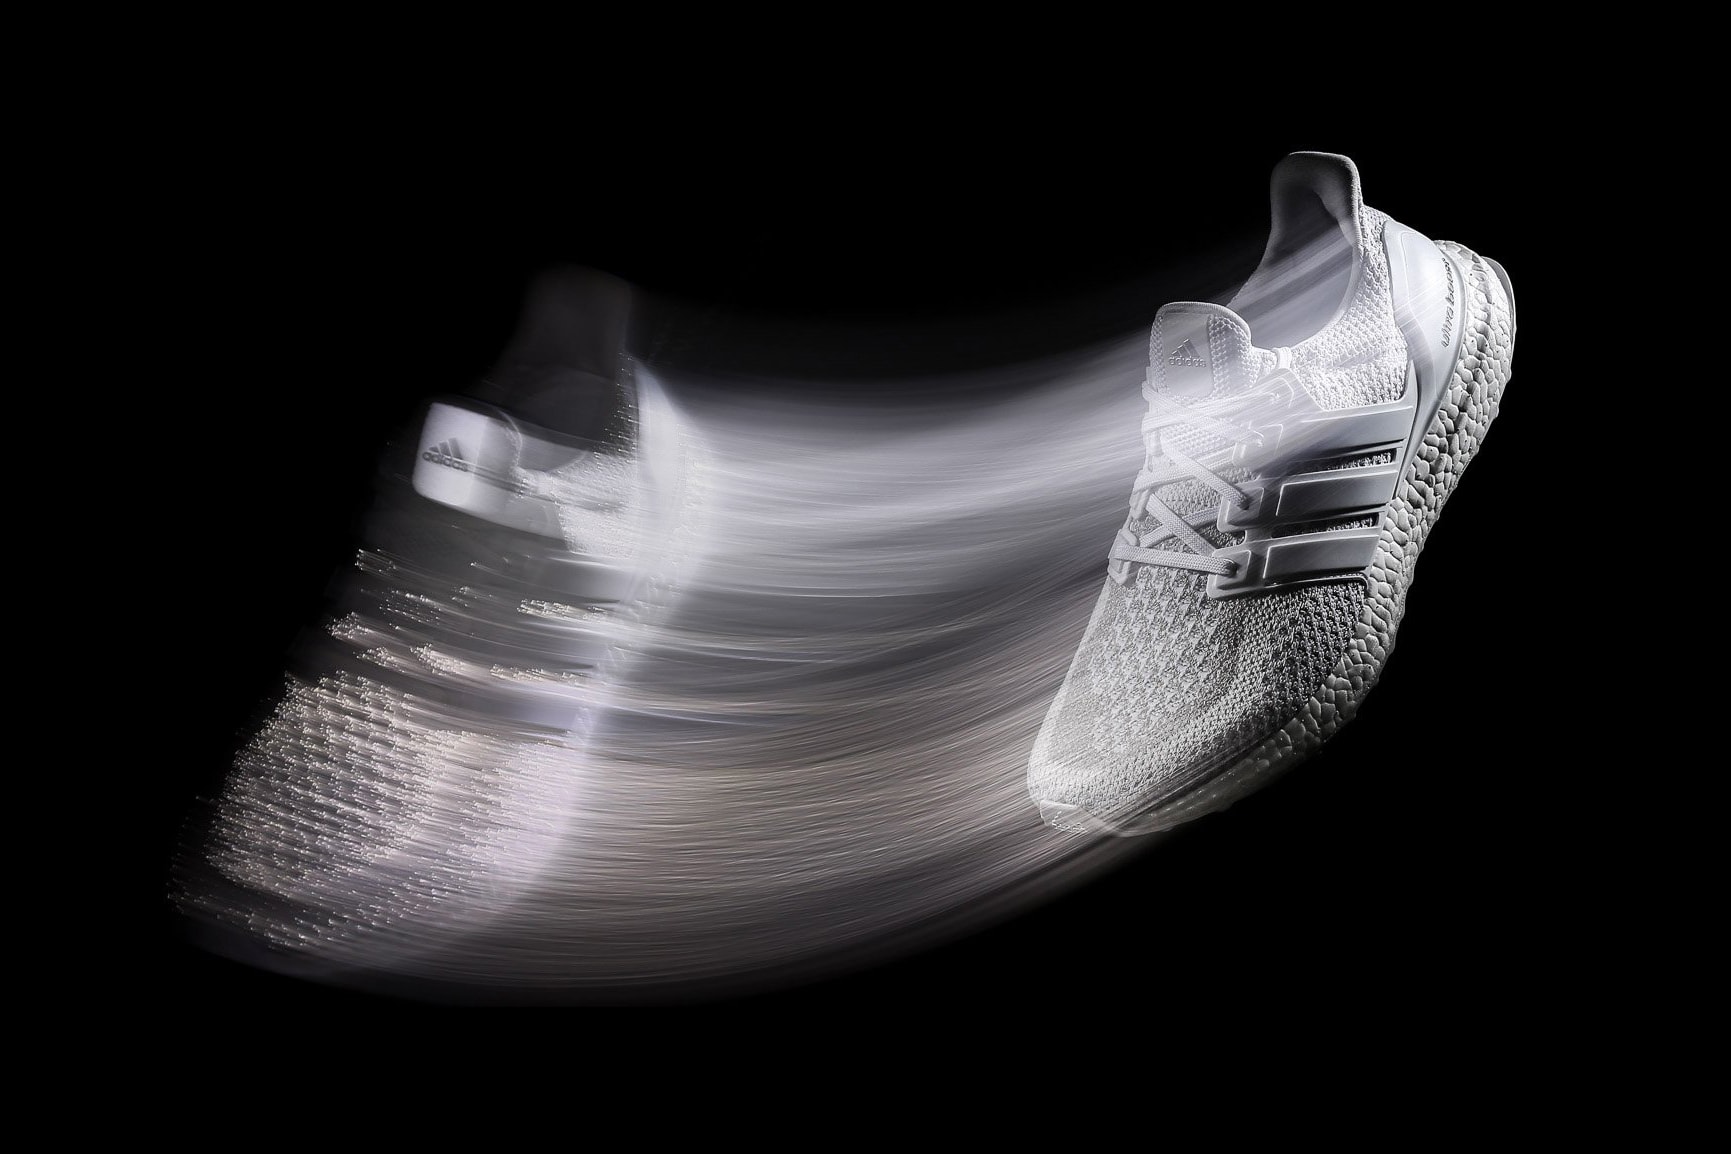 adidas UltraBOOST "White Reflective" Pack